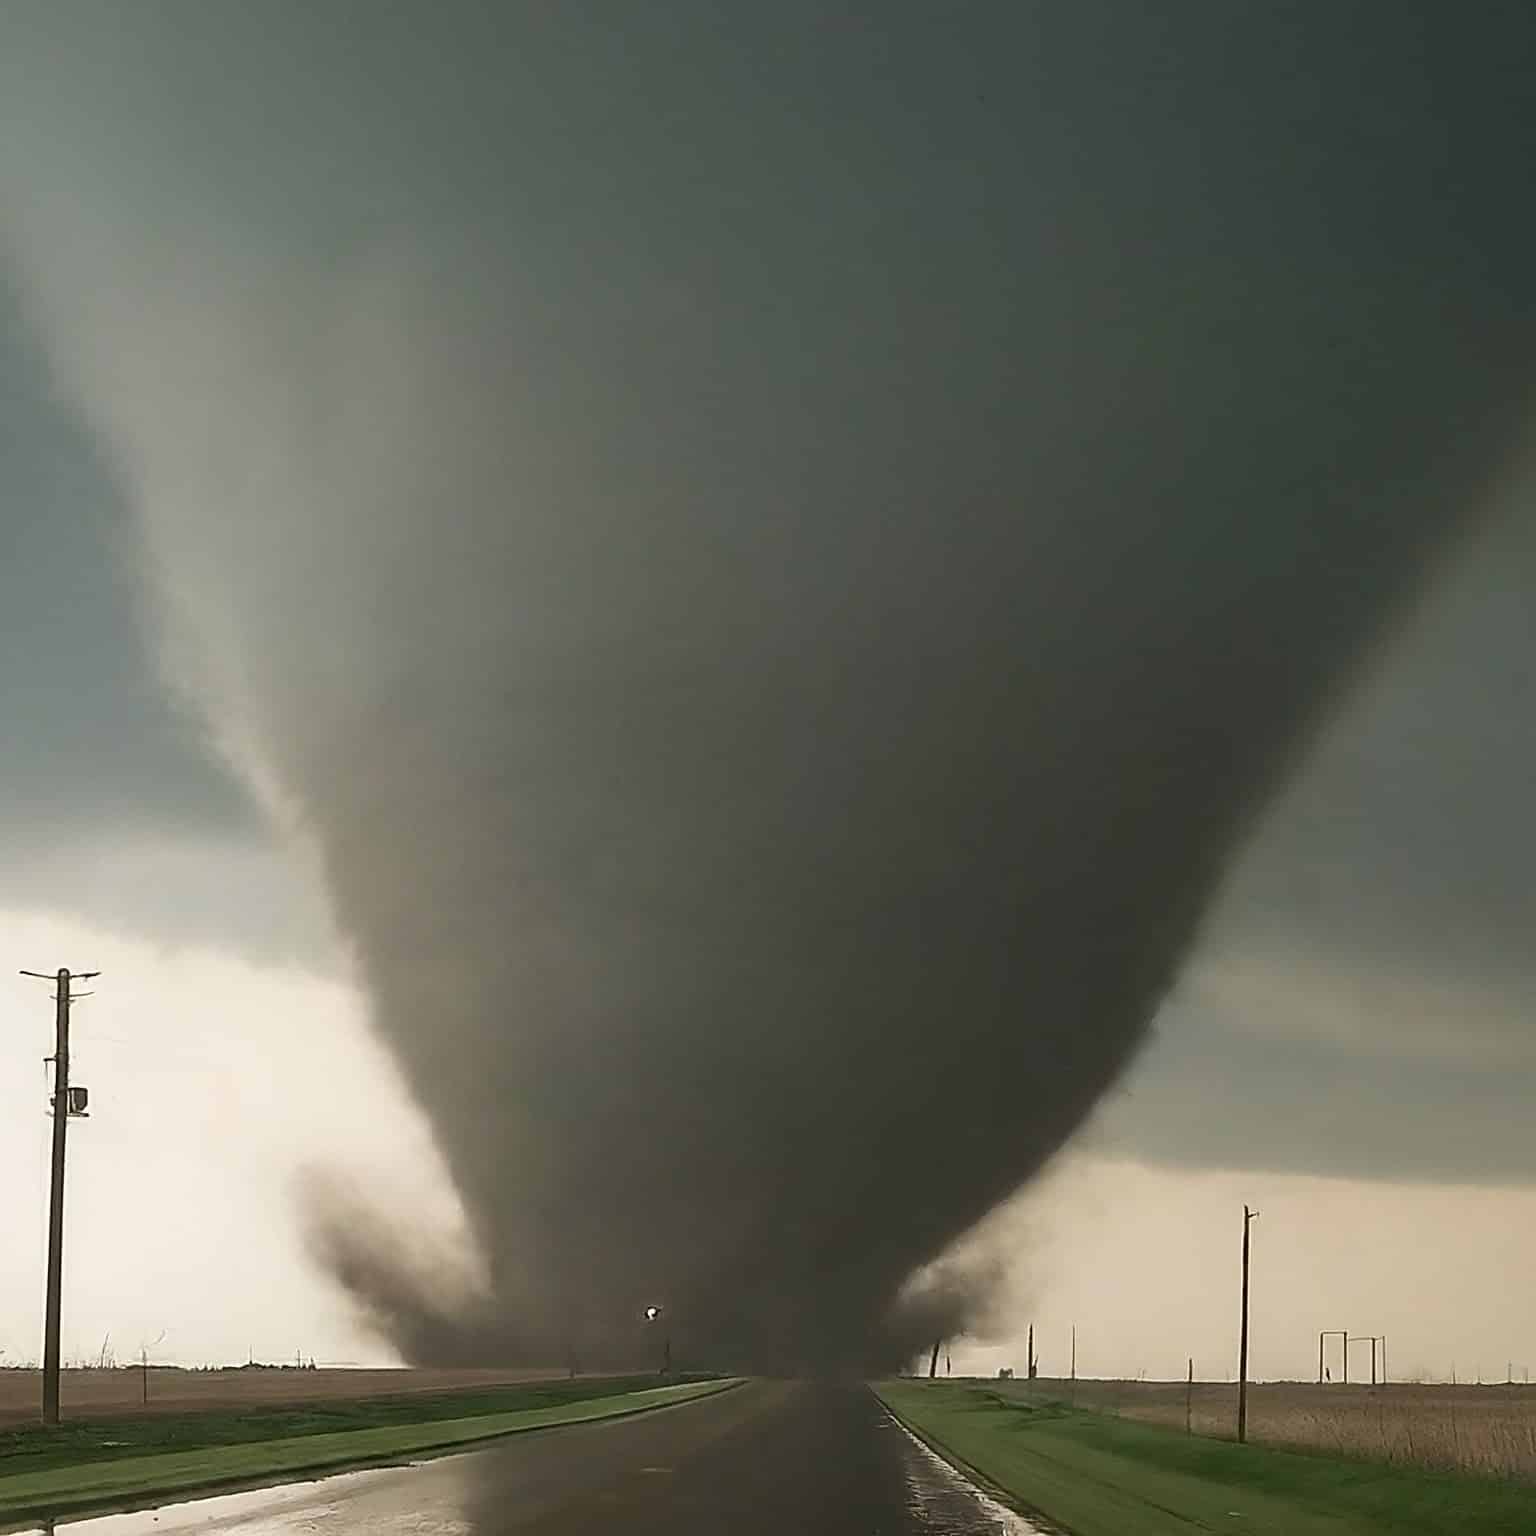 (WATCH) Deadly tornado outbreak causes catastrophic damage across Oklahoma